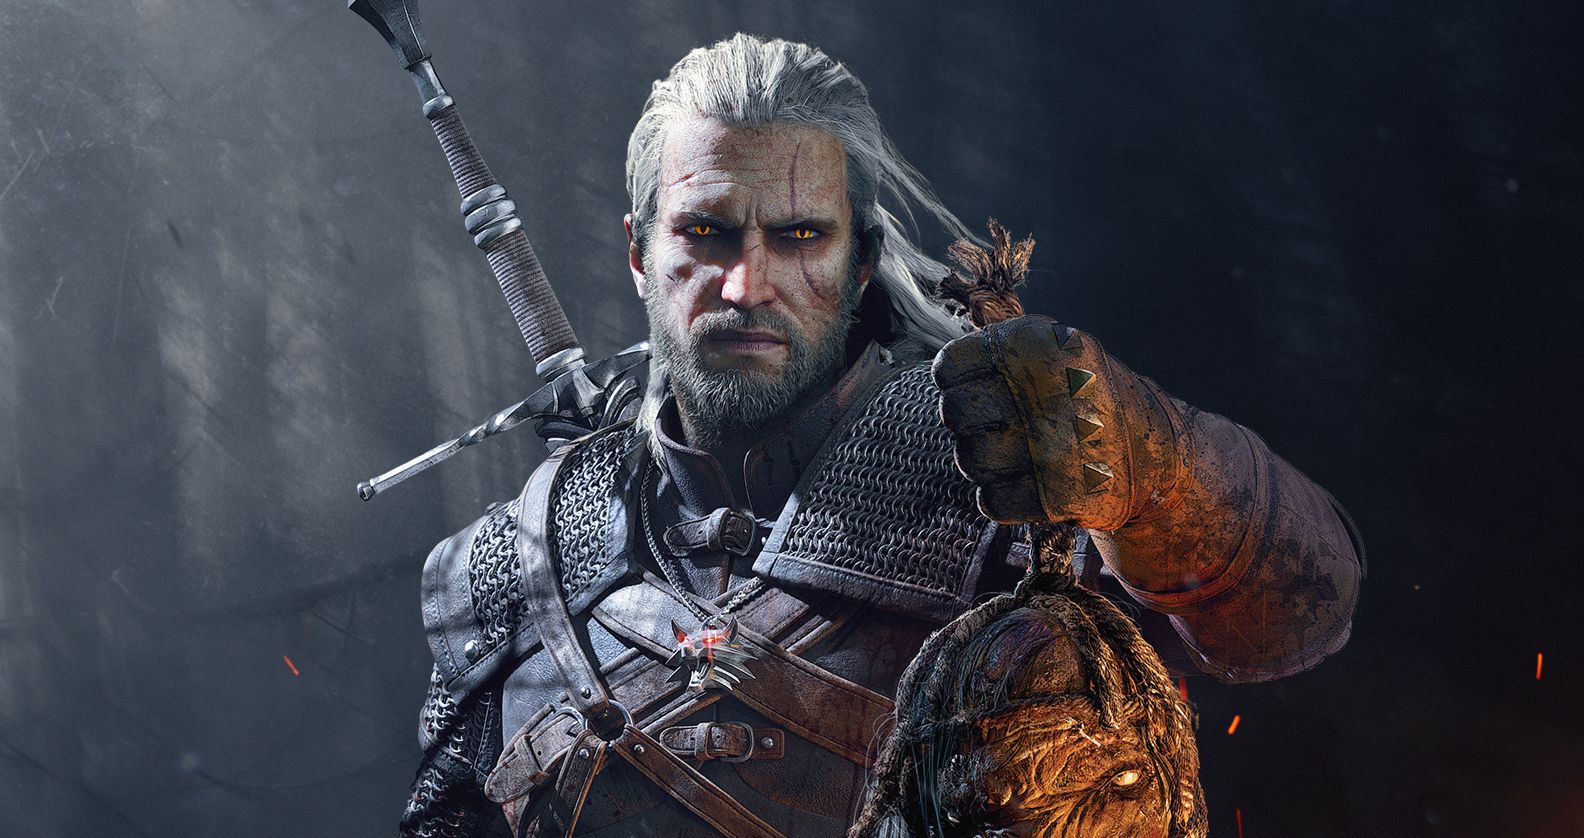 Image for The Witcher 3 development secrets - an anniversary interview with CD Projekt Red